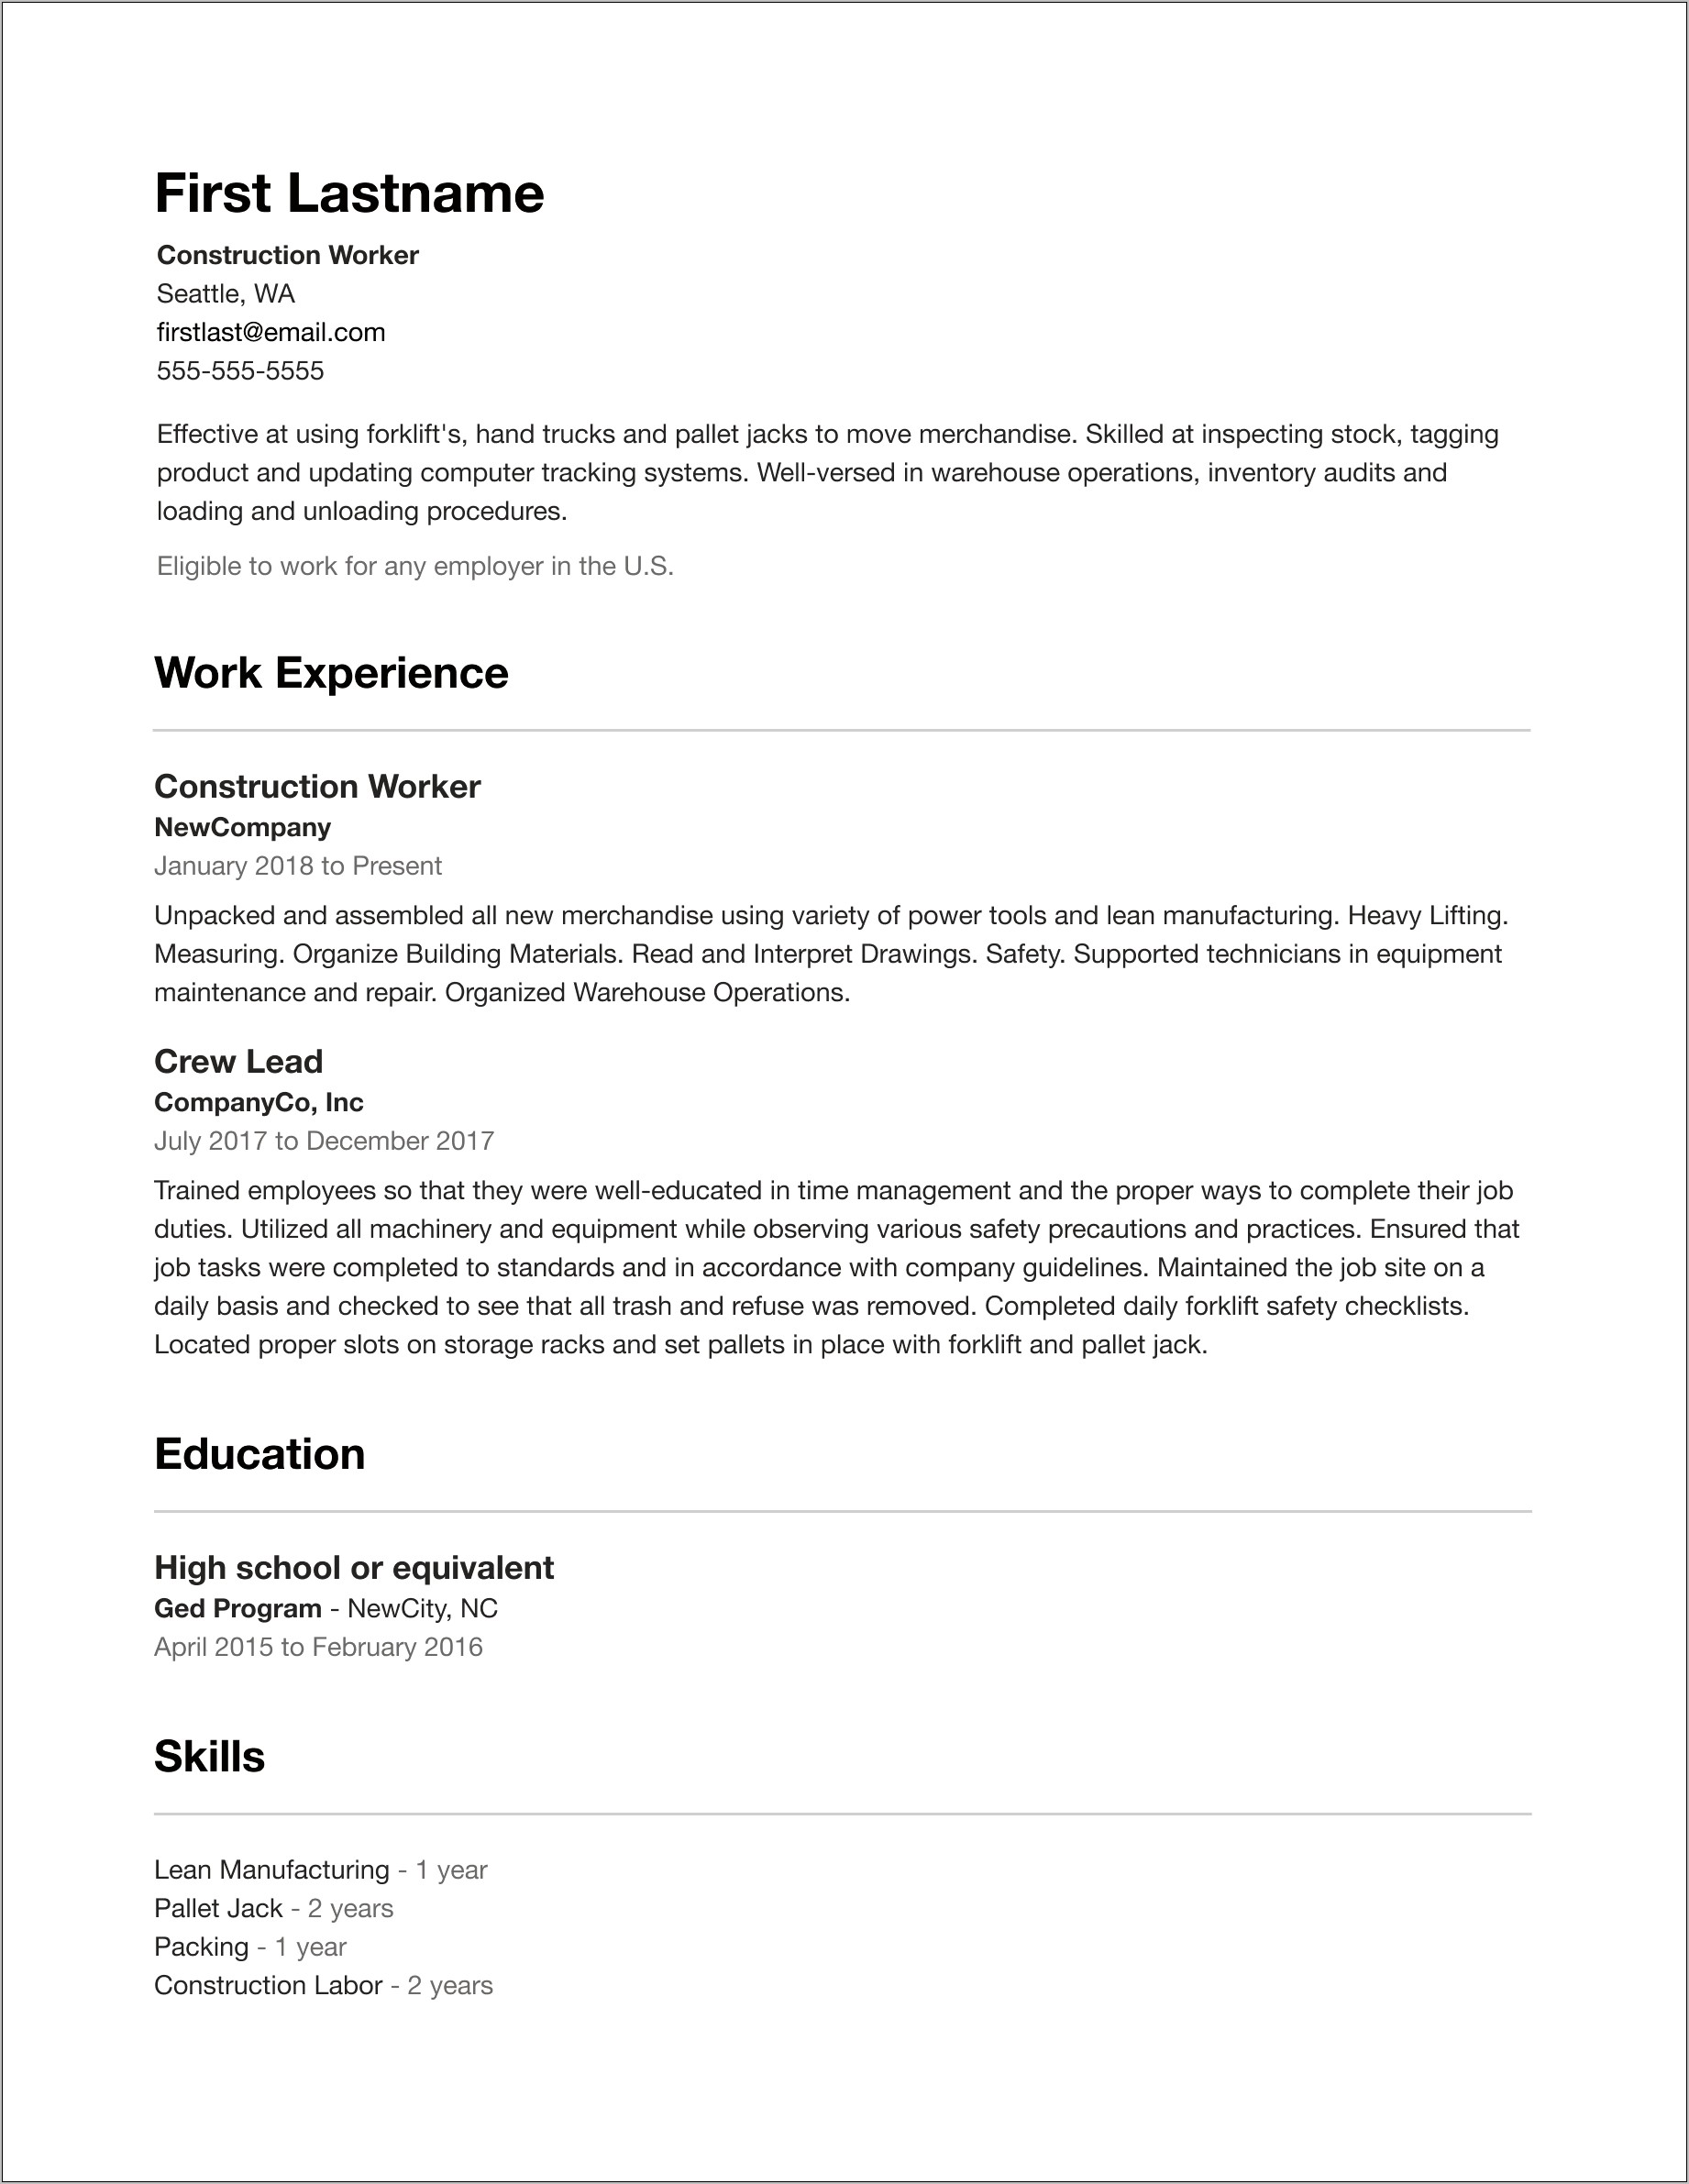 Resume Cover Letter Examples Indeed.com